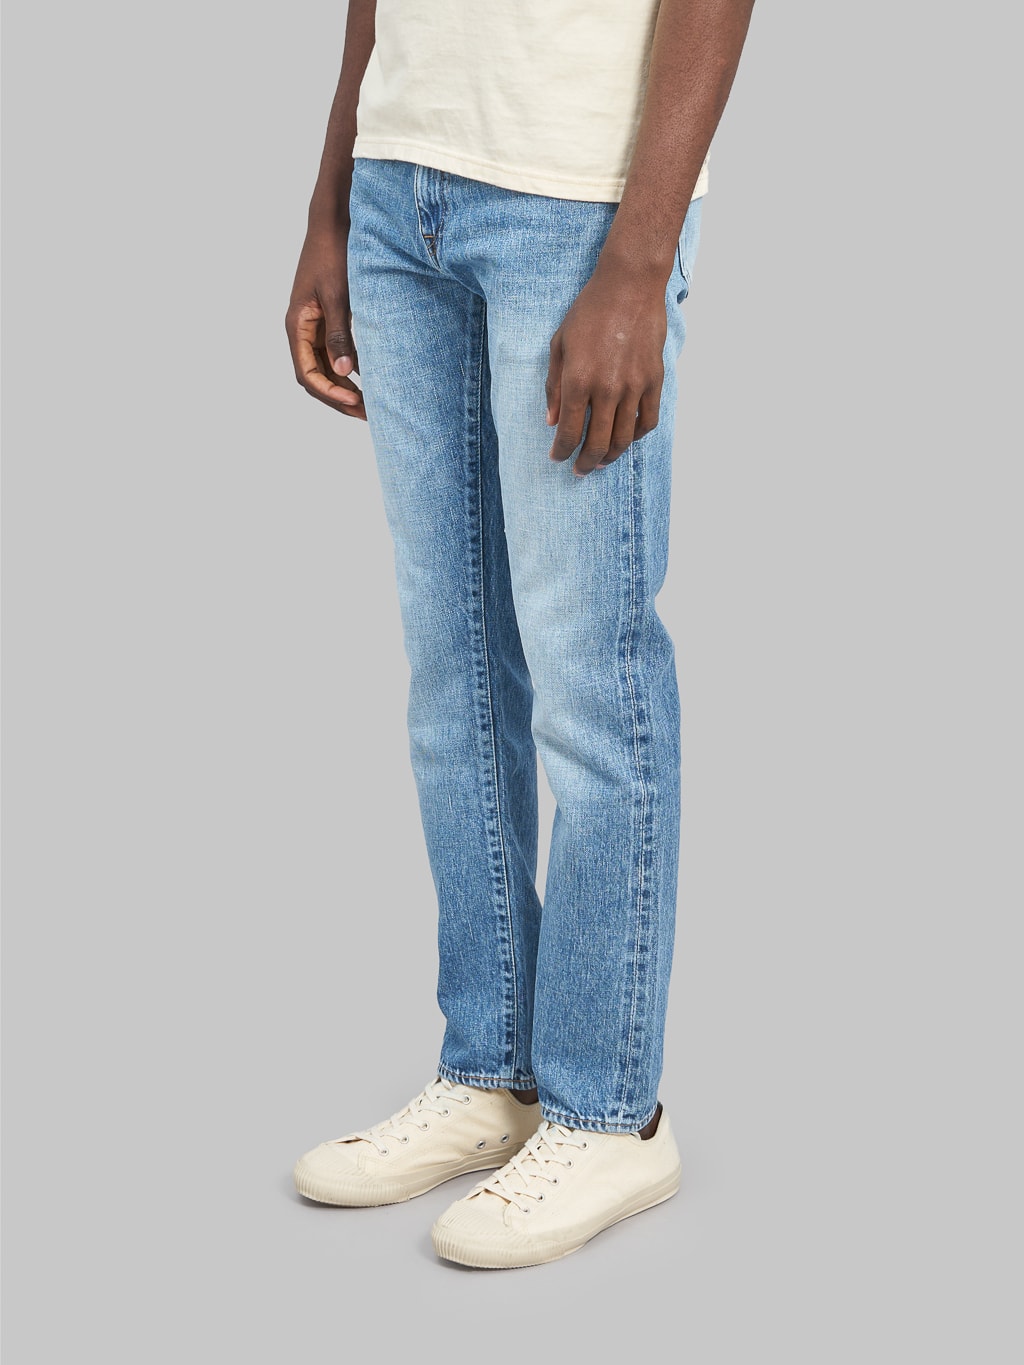 Japan Blue J304 Africa cotton Stonewashed Straight Jeans  side fit